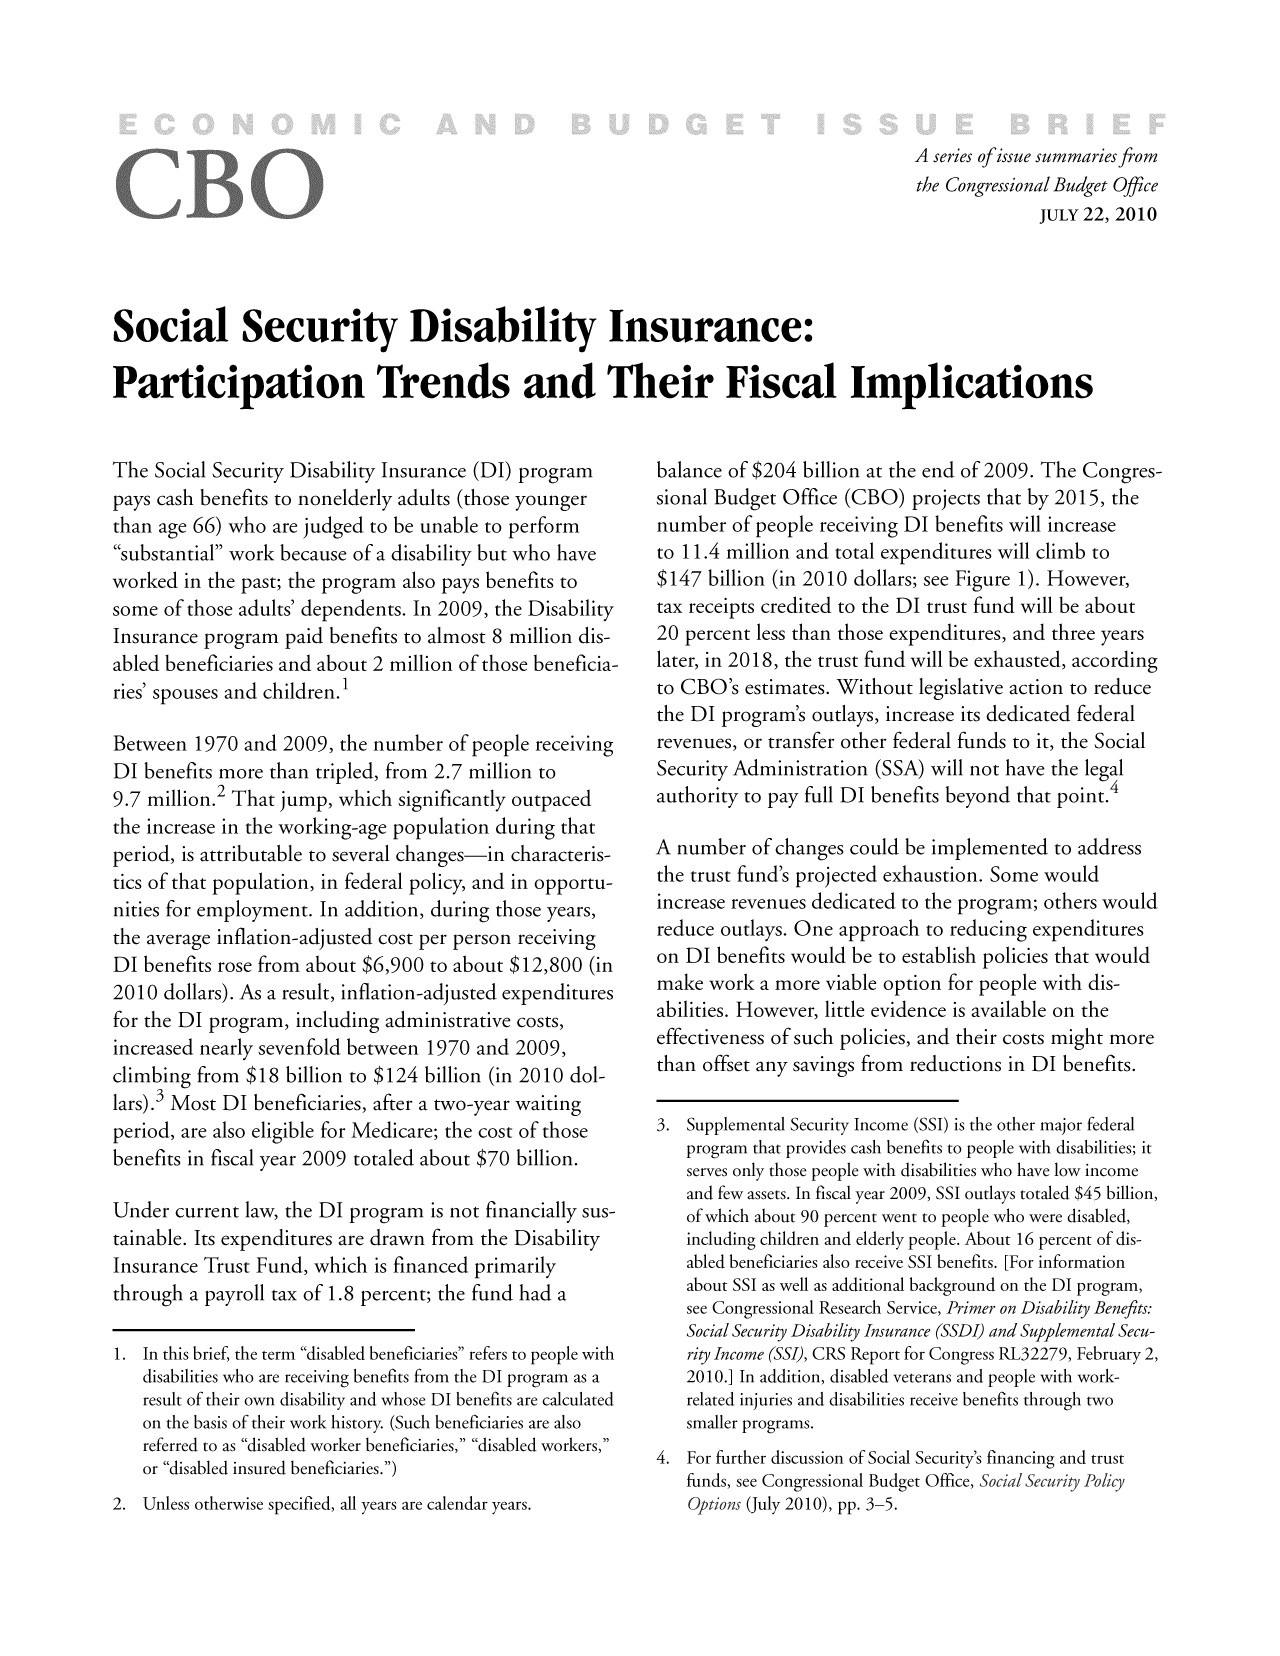 handle is hein.congrec/cbo7068 and id is 1 raw text is: A series of issue summaries from
the Congressional Budget Office
JULY 22, 2010
Social Security Disability Insurance:
Participation Trends and Their Fiscal Implications

The Social Security Disability Insurance (DI) program
pays cash benefits to nonelderly adults (those younger
than age 66) who are judged to be unable to perform
substantial work because of a disability but who have
worked in the past; the program also pays benefits to
some of those adults' dependents. In 2009, the Disability
Insurance program paid benefits to almost 8 million dis-
abled beneficiaries and about 2 million of those beneficia-
ries' spouses and children.1
Between 1970 and 2009, the number of people receiving
DI benefits more than tripled, from 2.7 million to
9.7 million.2 That jump, which significantly outpaced
the increase in the working-age population during that
period, is attributable to several changes-in characteris-
tics of that population, in federal policy, and in opportu-
nities for employment. In addition, during those years,
the average inflation-adjusted cost per person receiving
DI benefits rose from about $6,900 to about $12,800 (in
2010 dollars). As a result, inflation-adjusted expenditures
for the DI program, including administrative costs,
increased nearly sevenfold between 1970 and 2009,
climbing from $18 billion to $124 billion (in 2010 dol-
lars).3 Most DI beneficiaries, after a two-year waiting
period, are also eligible for Medicare; the cost of those
benefits in fiscal year 2009 totaled about $70 billion.
Under current law, the DI program is not financially sus-
tainable. Its expenditures are drawn from the Disability
Insurance Trust Fund, which is financed primarily
through a payroll tax of 1.8 percent; the fund had a
1. In this brief, the term disabled beneficiaries refers to people with
disabilities who are receiving benefits from the DI program as a
result of their own disability and whose DI benefits are calculated
on the basis of their work history. (Such beneficiaries are also
referred to as disabled worker beneficiaries, disabled workers,
or disabled insured beneficiaries.)
2. Unless otherwise specified, all years are calendar years.

balance of $204 billion at the end of 2009. The Congres-
sional Budget Office (CBO) projects that by 2015, the
number of people receiving DI benefits will increase
to 11.4 million and total expenditures will climb to
$147 billion (in 2010 dollars; see Figure 1). However,
tax receipts credited to the DI trust fund will be about
20 percent less than those expenditures, and three years
later, in 2018, the trust fund will be exhausted, according
to CBO's estimates. Without legislative action to reduce
the DI program's outlays, increase its dedicated federal
revenues, or transfer other federal funds to it, the Social
Security Administration (SSA) will not have the legal
authority to pay full DI benefits beyond that point.4
A number of changes could be implemented to address
the trust fund's projected exhaustion. Some would
increase revenues dedicated to the program; others would
reduce outlays. One approach to reducing expenditures
on DI benefits would be to establish policies that would
make work a more viable option for people with dis-
abilities. However, little evidence is available on the
effectiveness of such policies, and their costs might more
than offset any savings from reductions in DI benefits.
3. Supplemental Security Income (SSI) is the other major federal
program that provides cash benefits to people with disabilities; it
serves only those people with disabilities who have low income
and few assets. In fiscal year 2009, SSI outlays totaled $45 billion,
of which about 90 percent went to people who were disabled,
including children and elderly people. About 16 percent of dis-
abled beneficiaries also receive SSI benefits. [For information
about SSI as well as additional background on the DI program,
see Congressional Research Service, Primer on Disability Benefits:
Social Security Disability Insurance (SSDI) and Supplemental Secu-
rity Income (SSI), CRS Report for Congress RL32279, February 2,
2010.] In addition, disabled veterans and people with work-
related injuries and disabilities receive benefits through two
smaller programs.
4. For further discussion of Social Security's financing and trust
funds, see Congressional Budget Office, Social Security Policy
Options (July 2010), pp. 3-5.


